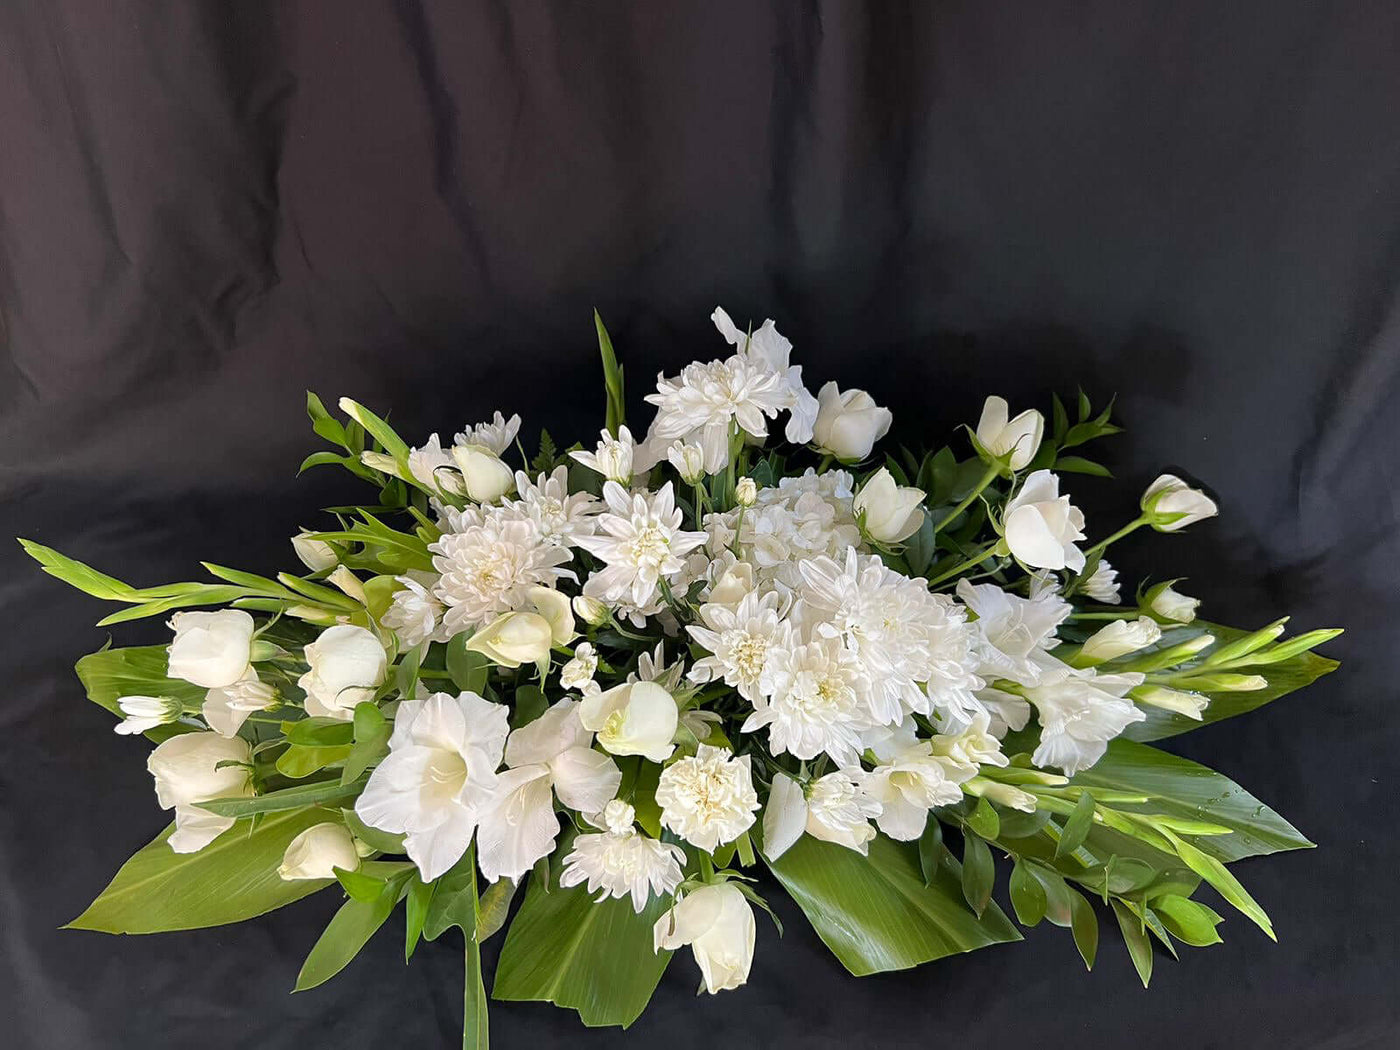 Sympathy-Funeral-White-Flower-arrangement-Purity-DodoMarket-delivery-Mauritius